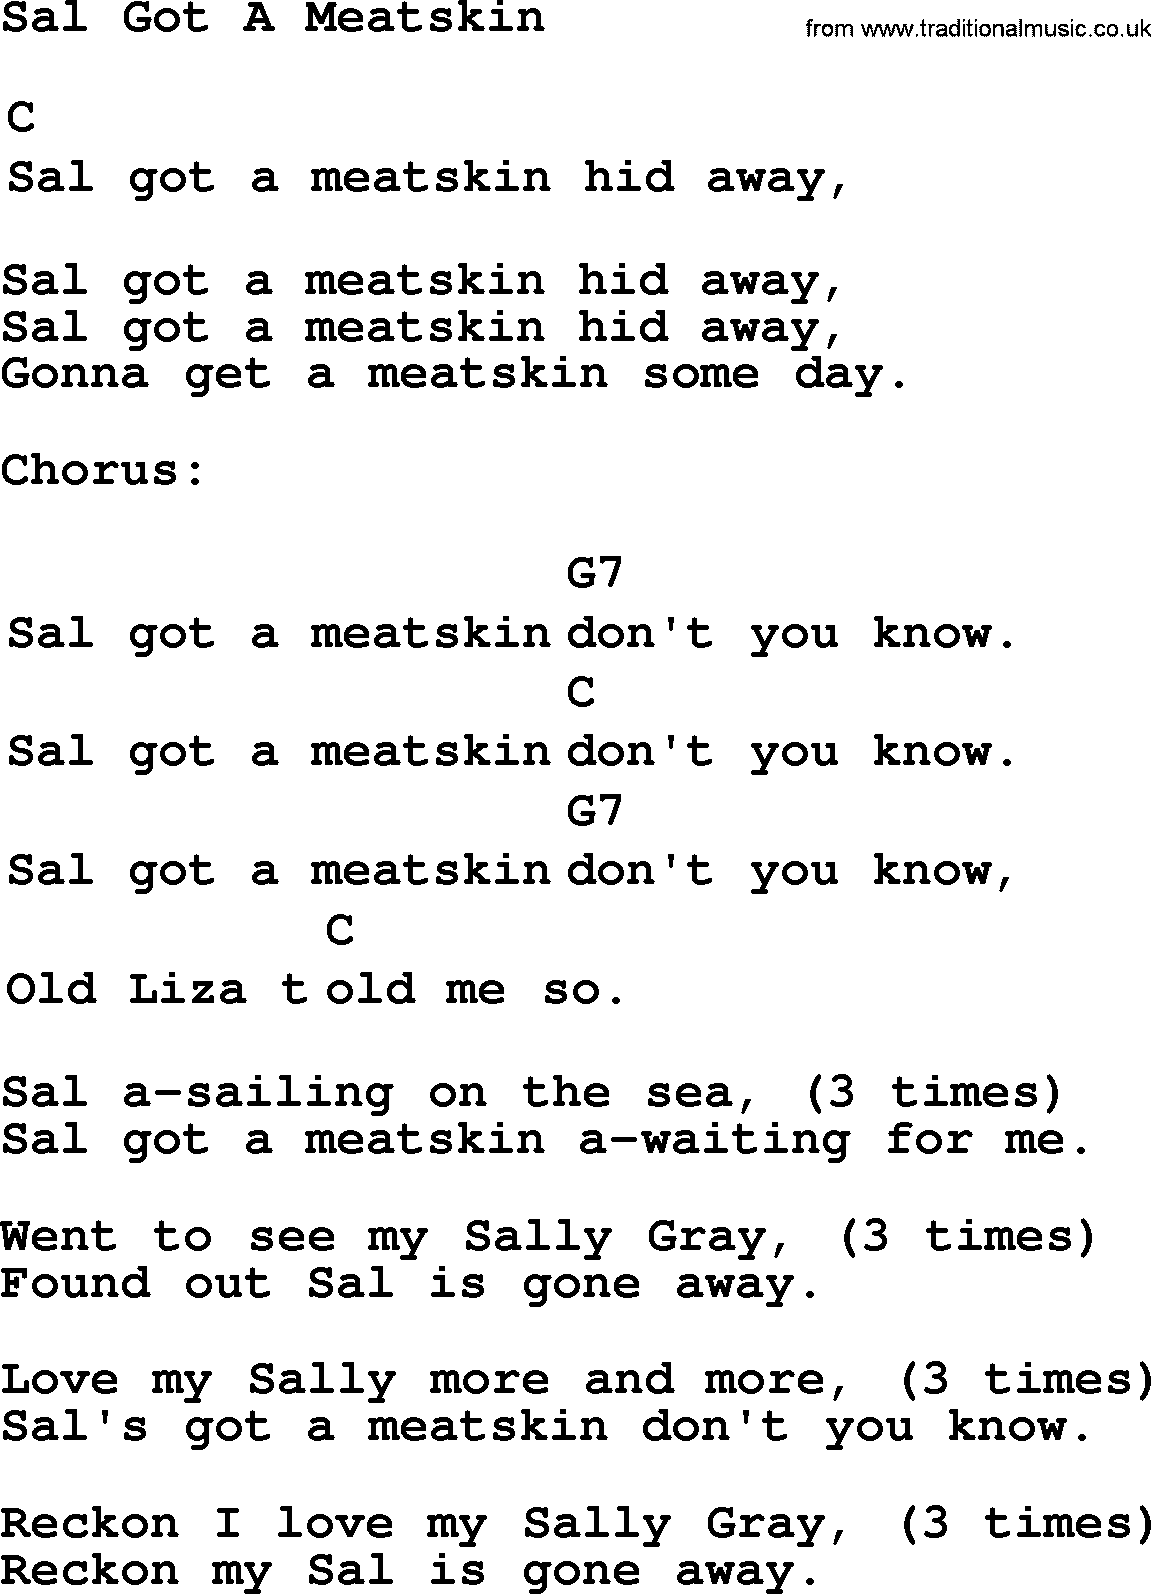 Top 1000 Most Popular Folk and Old-time Songs: Sal Got A Meatskin, lyrics and chords